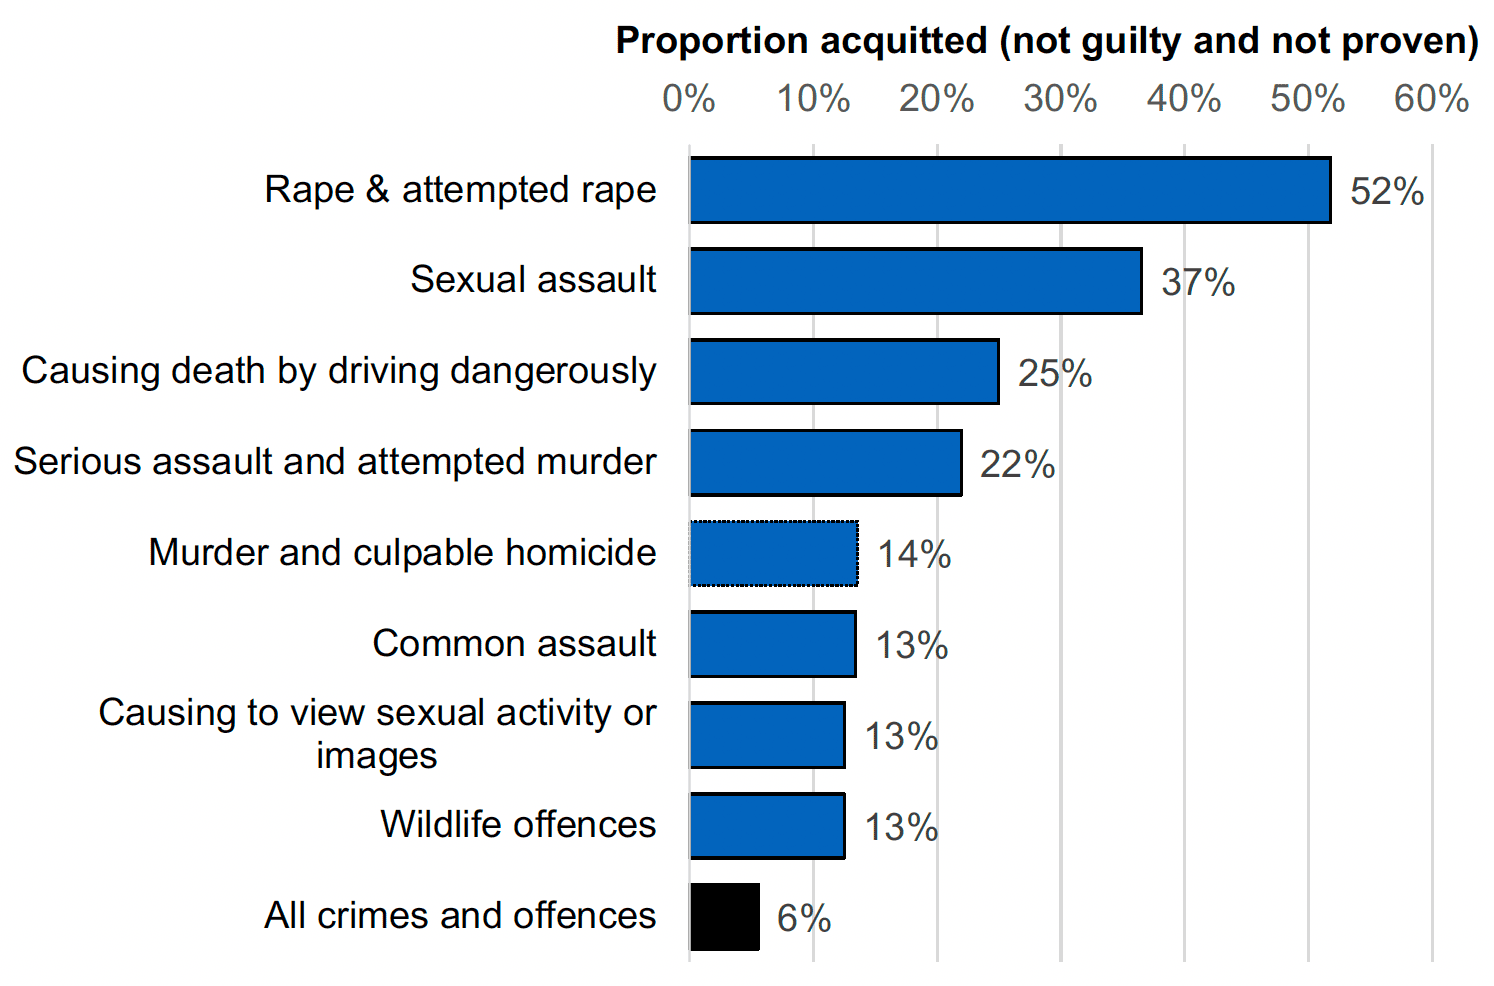 A bar chart highlighting crime types with the highest acquittal rates, the two largest being Rape and attempted rape (52%) and sexual assault (37%). For context, the acquittal rate for All crimes and offences was 6%.